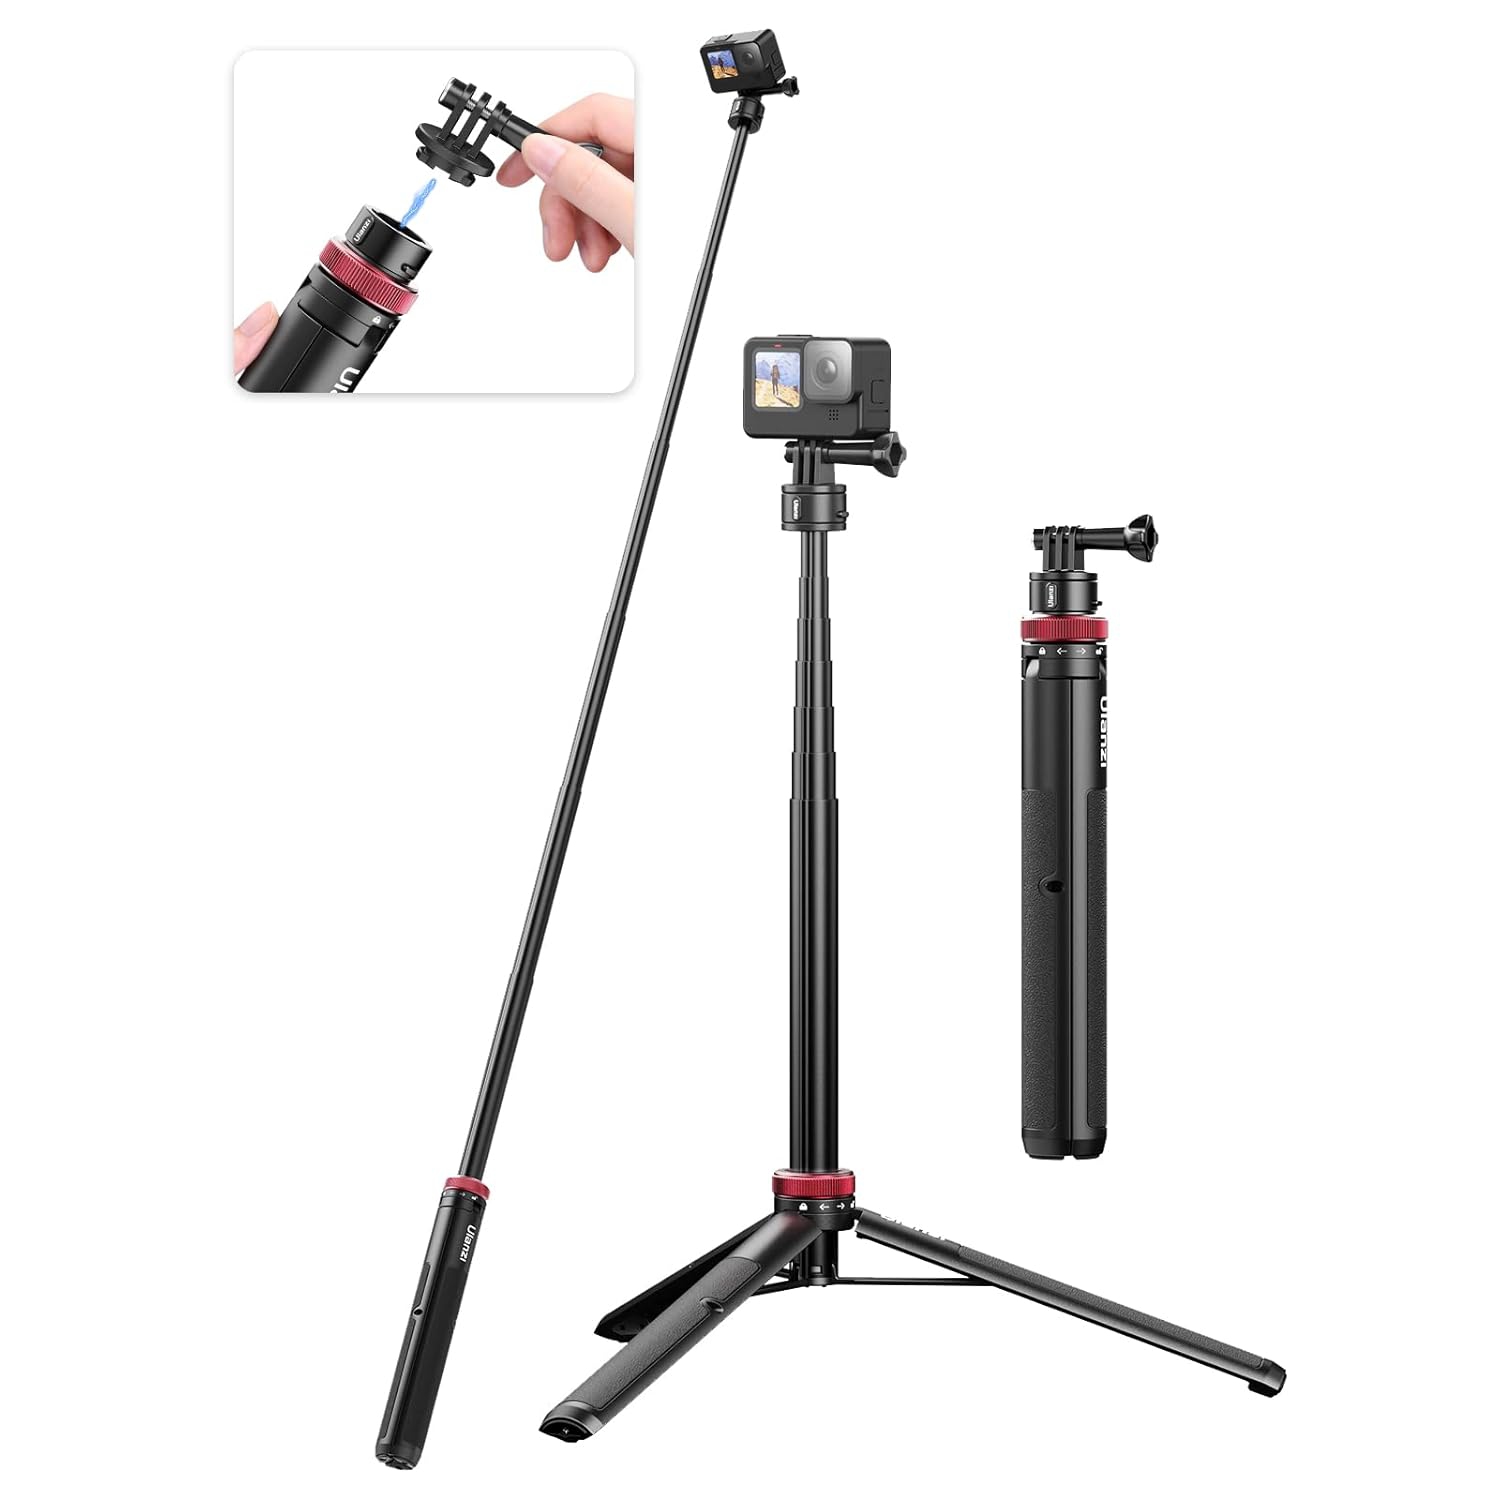 Go Quick II: 57in Extendable Selfie Tripod Accessories for GoPro - Long Action Camera Stick Tripod with Quick Release Adapter and Vlog Handle Grip